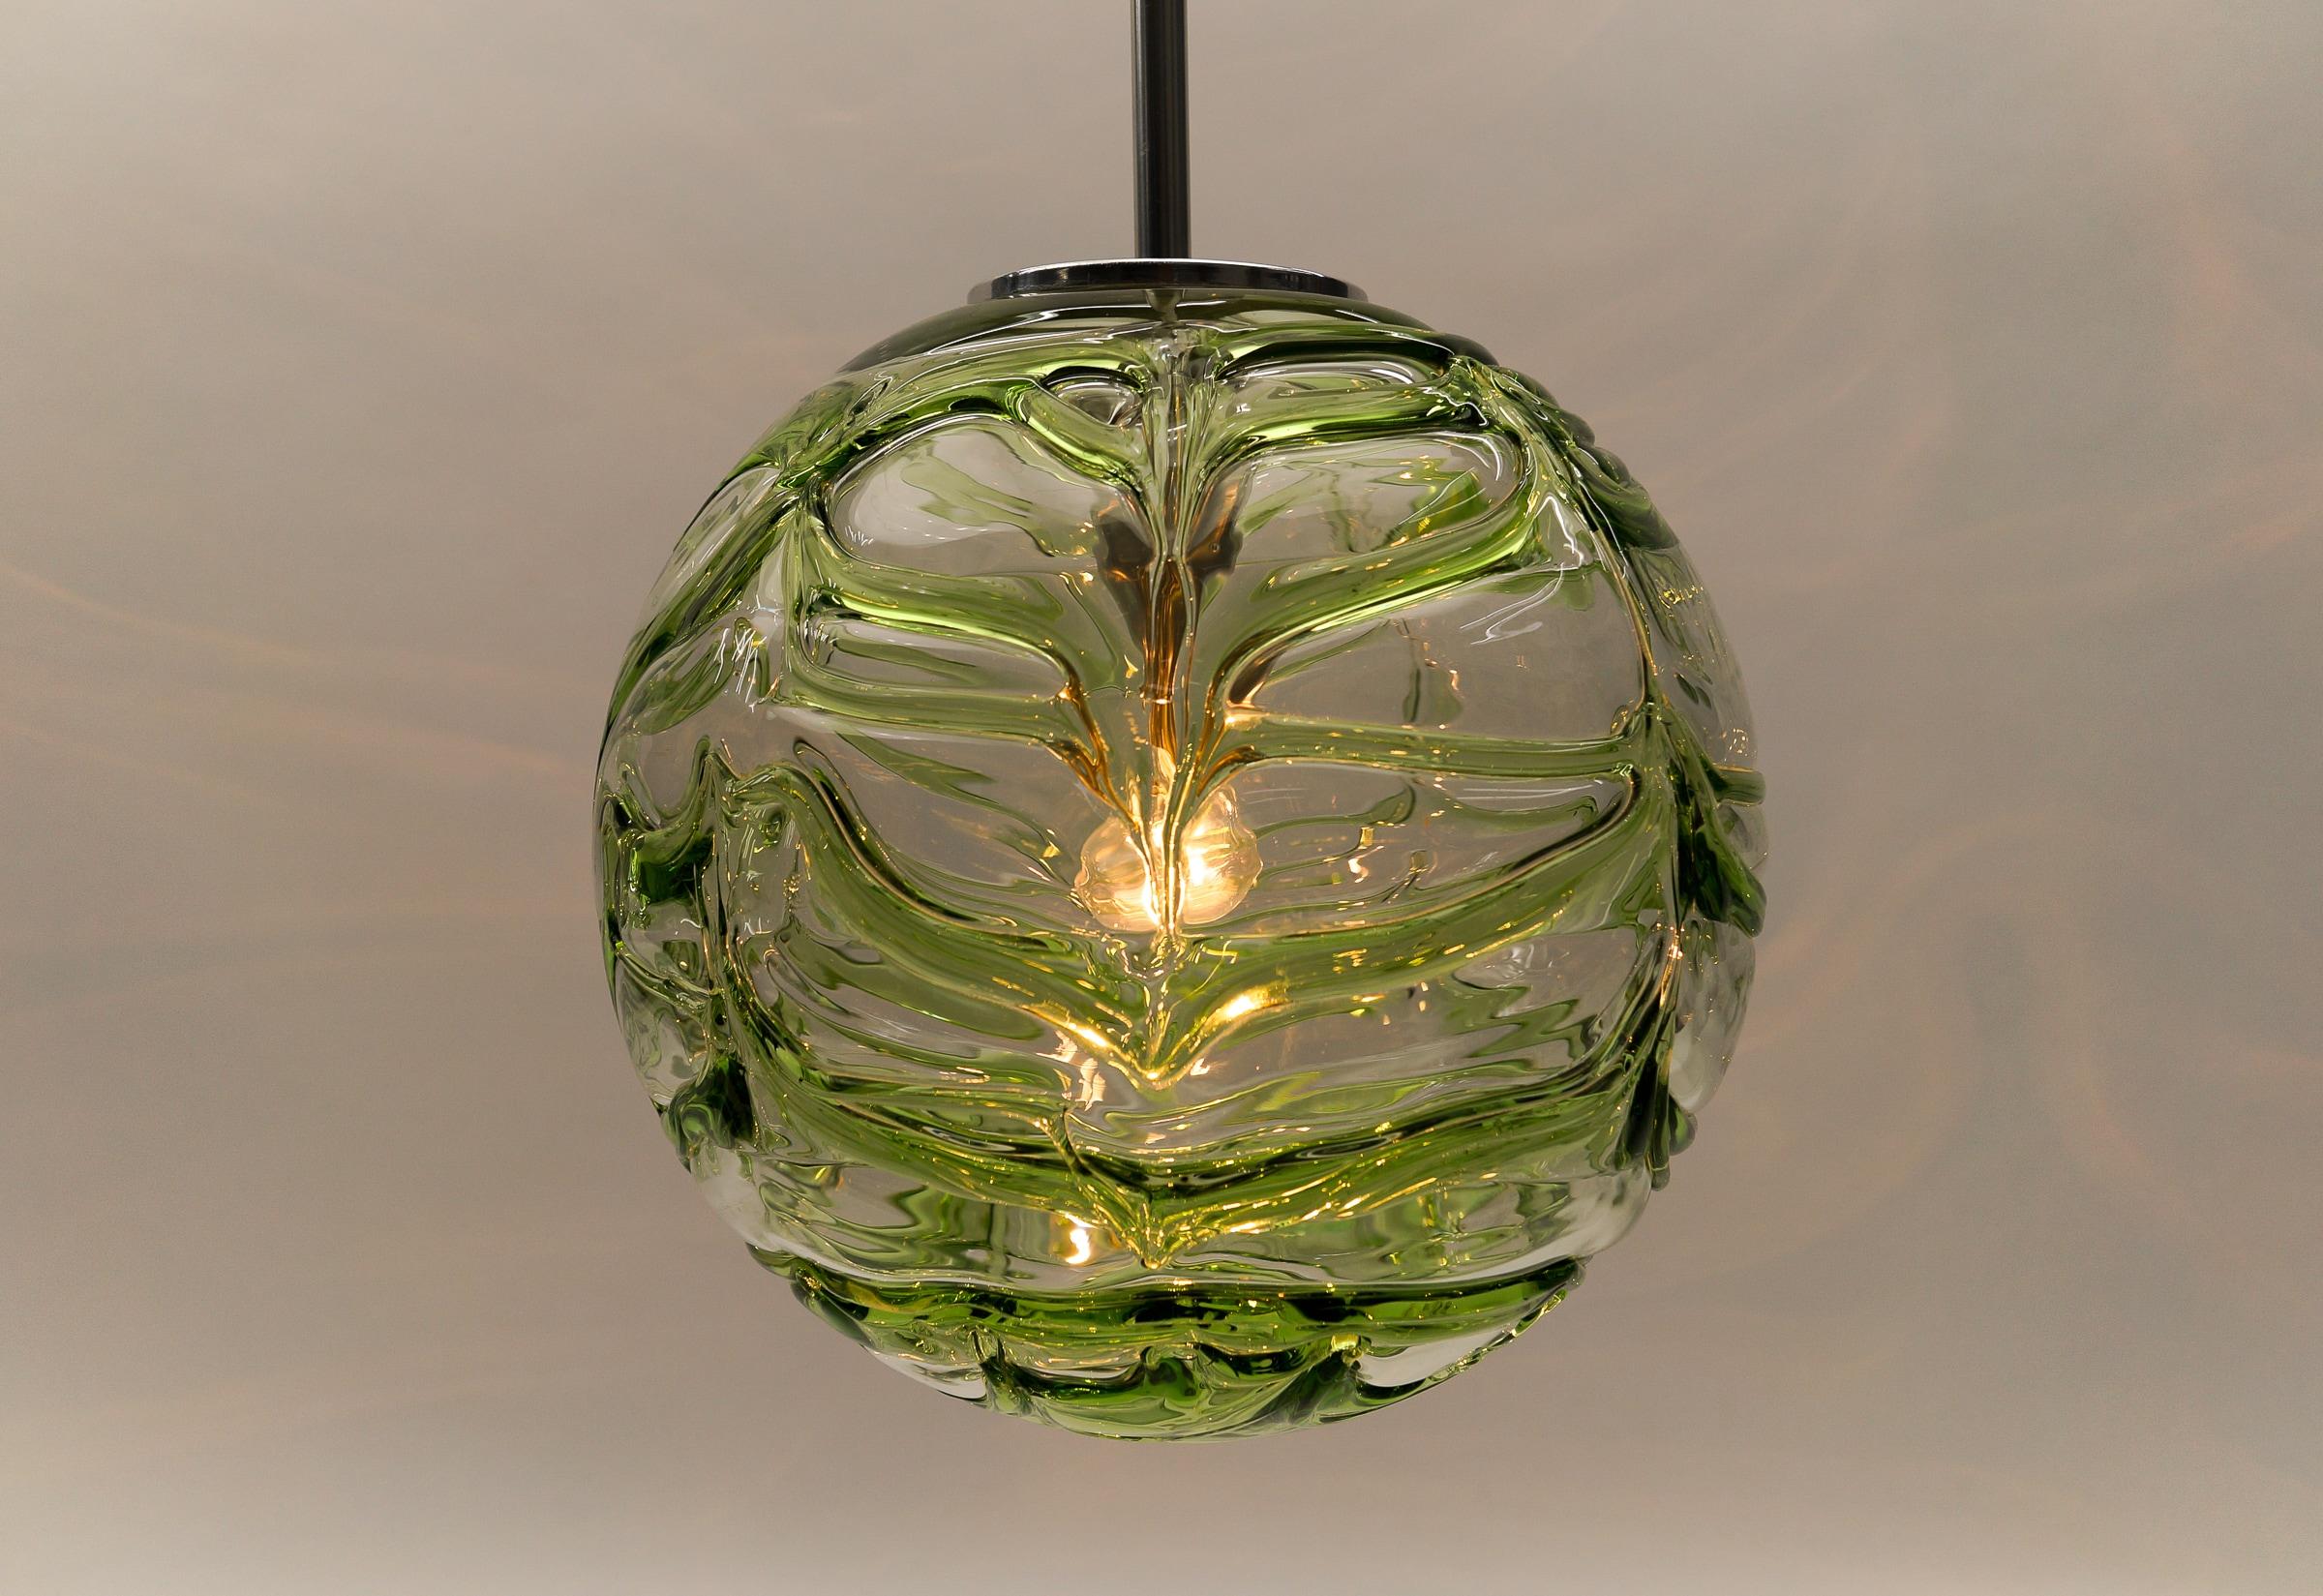 Large Green Murano Glass Ball Pendant Lamp by Doria, - 1960s Germany For Sale 3